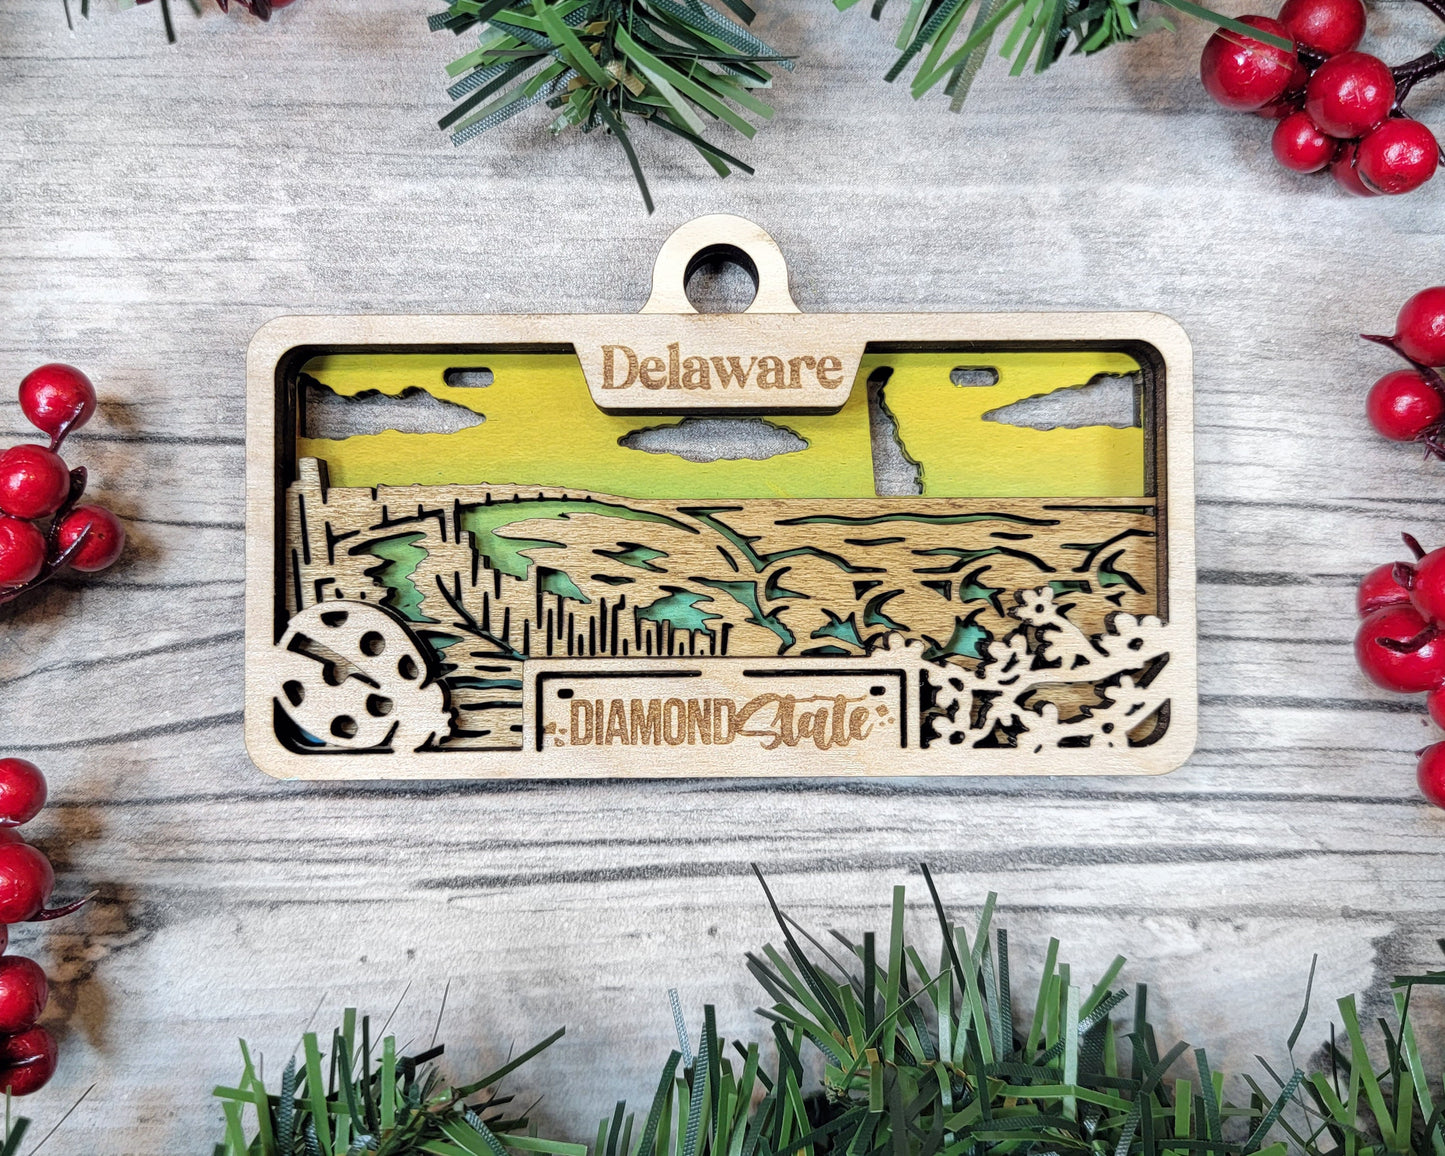 Delaware State Plate Ornament and Signage - SVG File Download - Sized for Glowforge - Laser Ready Digital Files